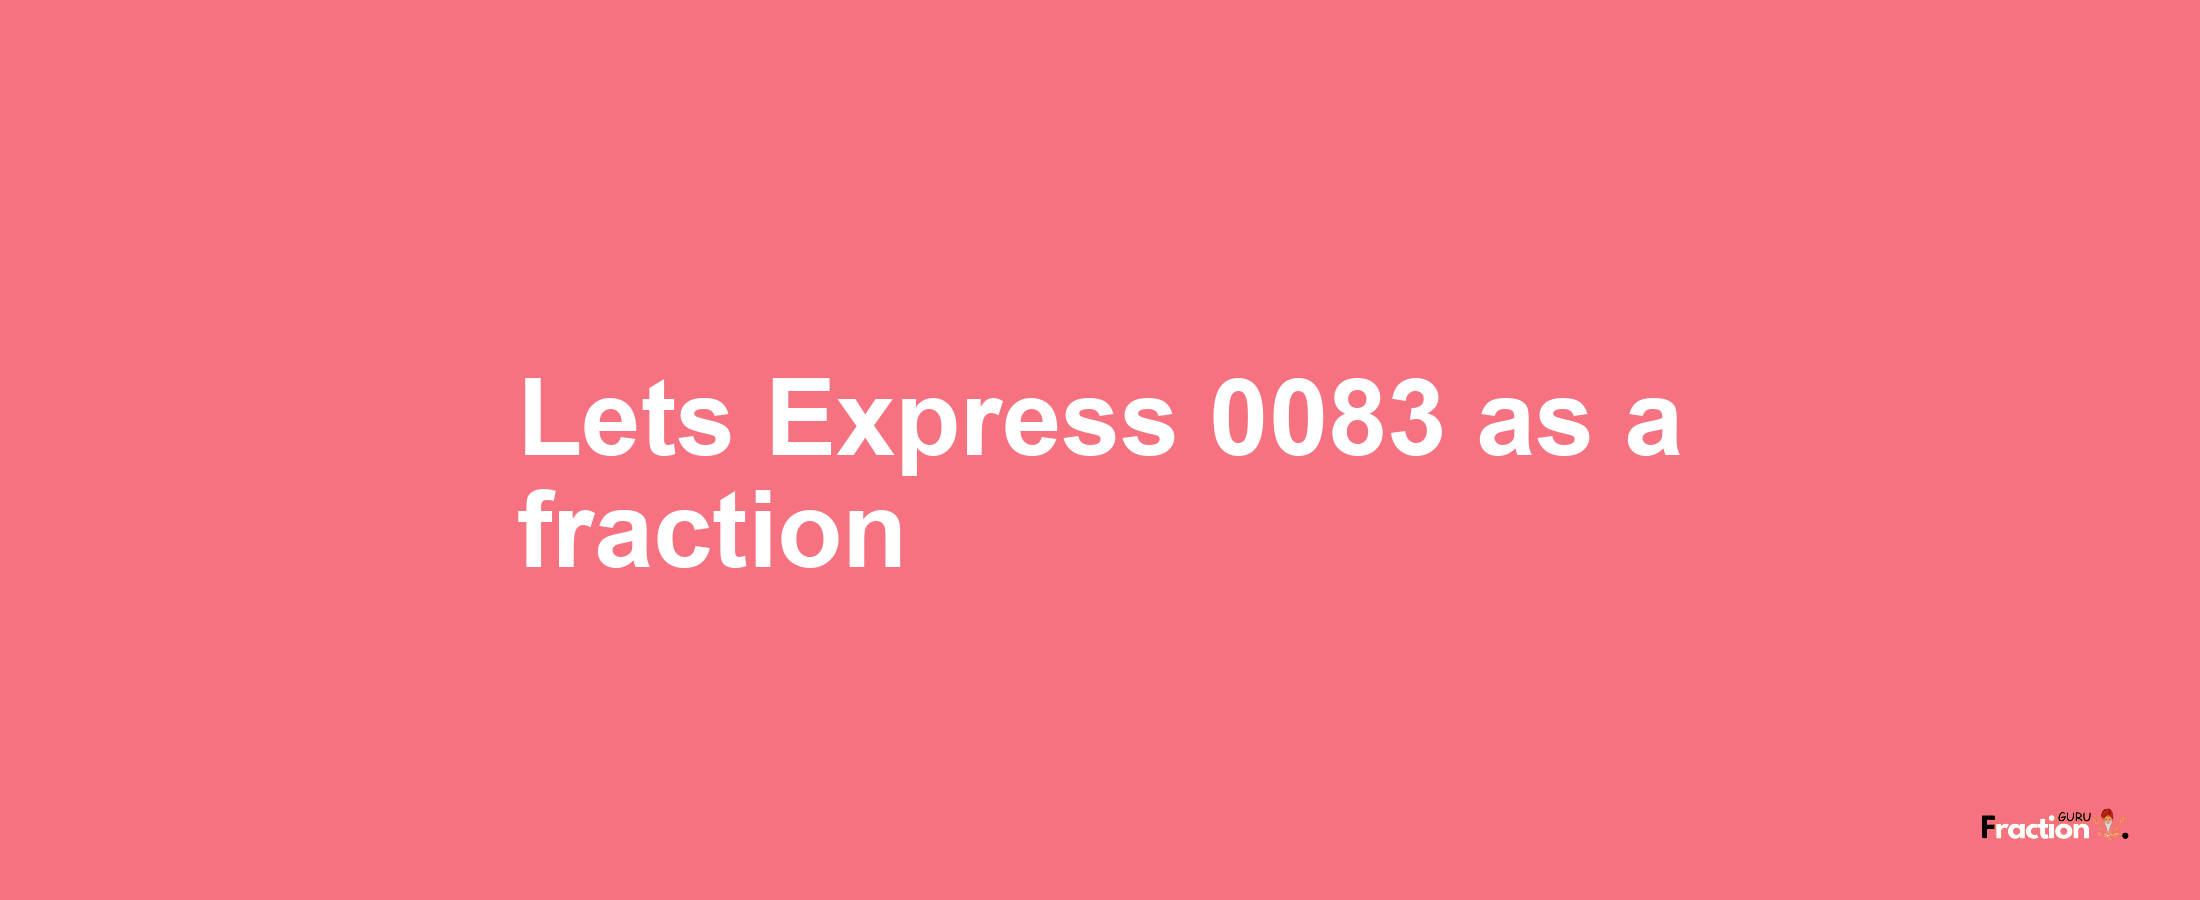 Lets Express 0083 as afraction